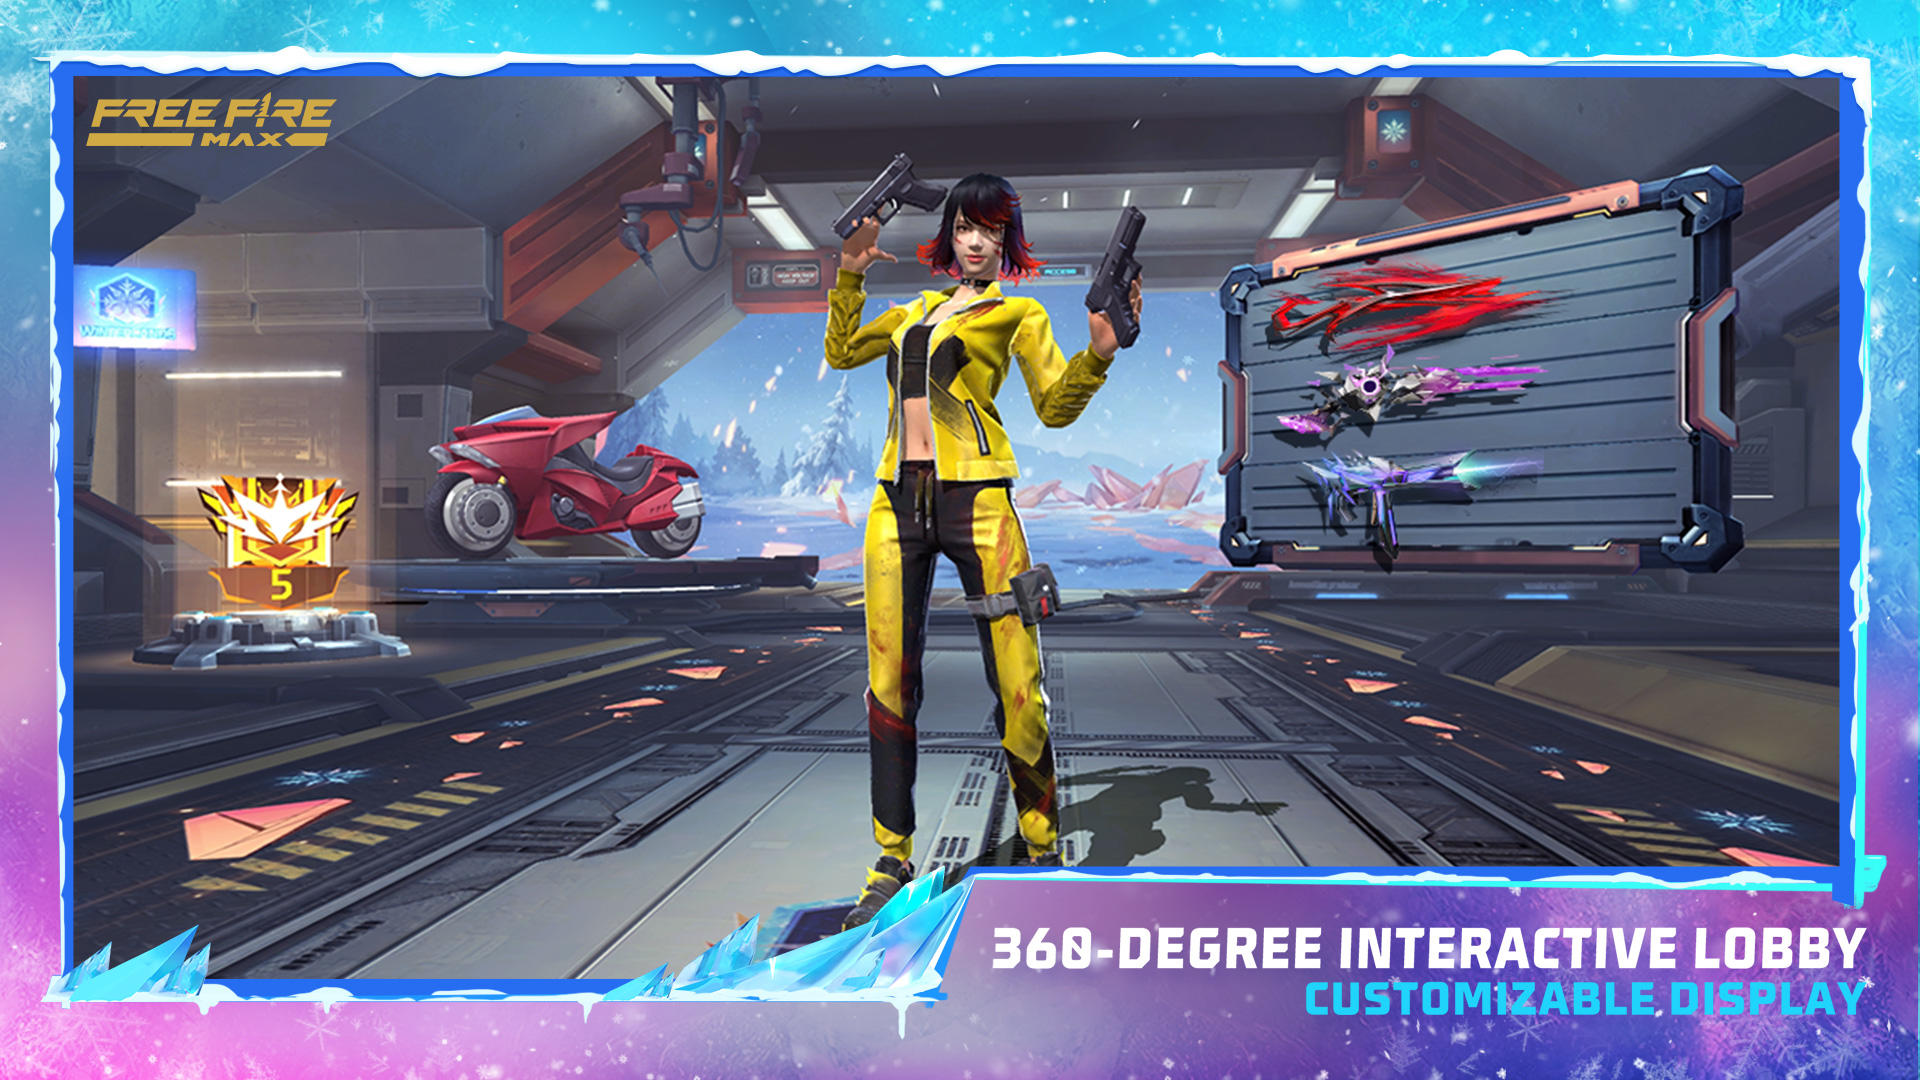 Play Android Games Without Downloading, Like Freefire